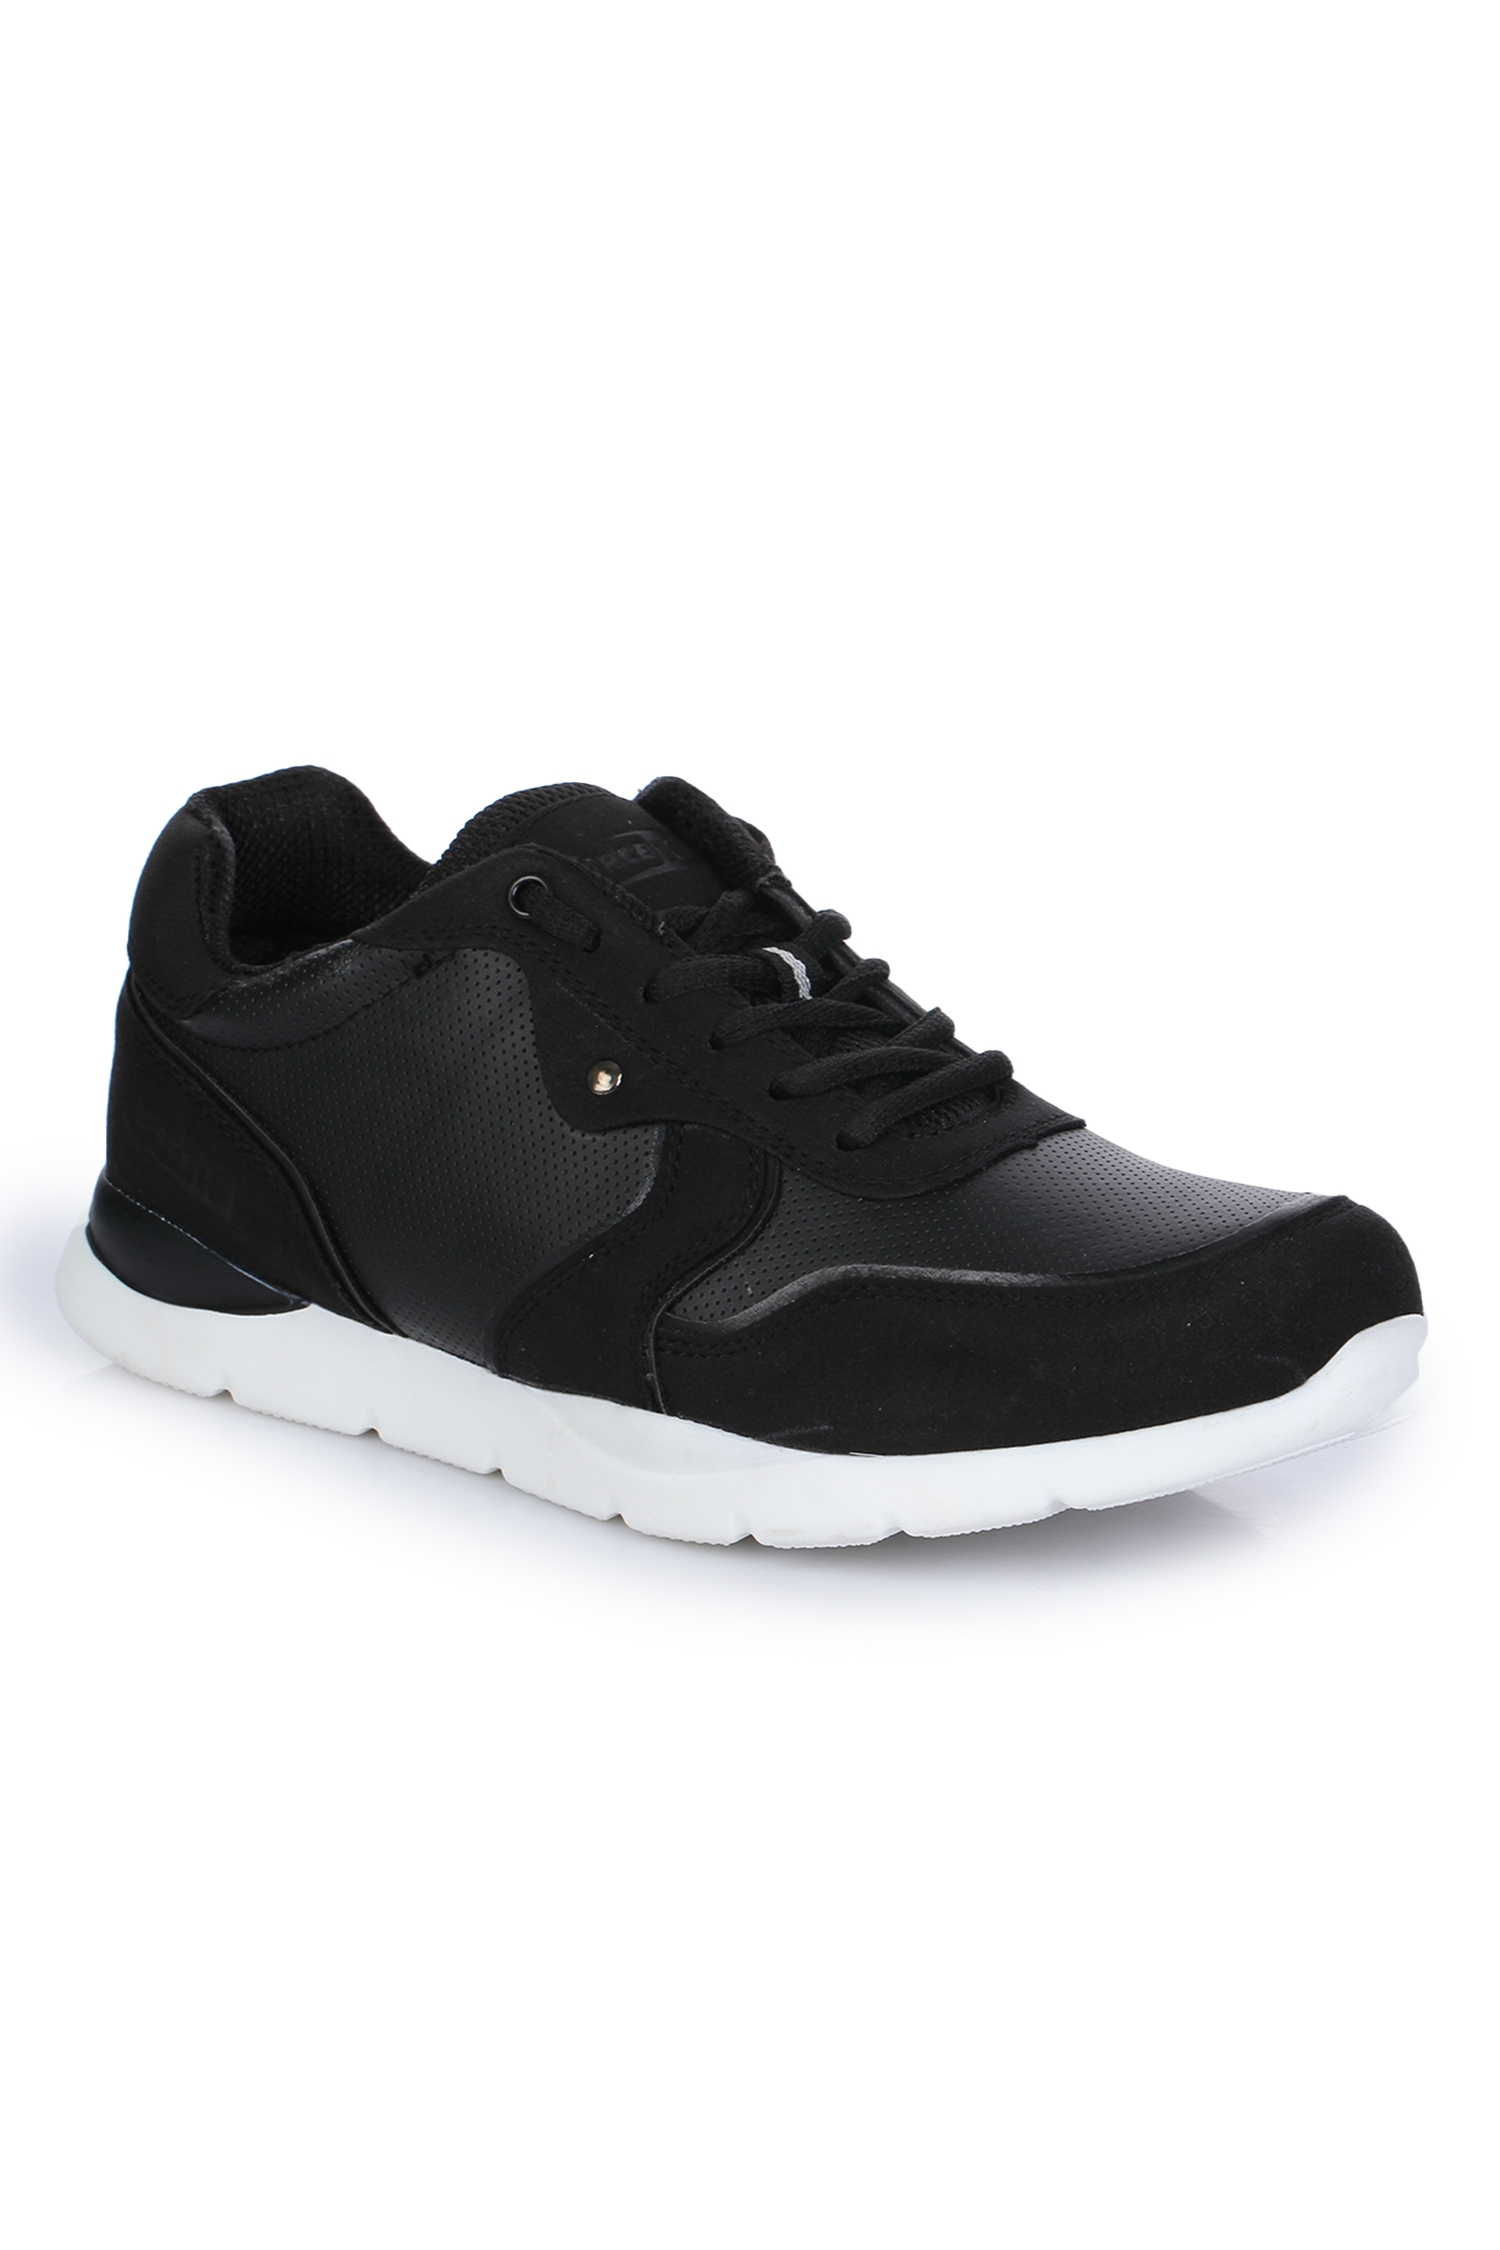 Liberty | Liberty Leap7X Black Sports Running Shoes ROLLER For - Mens